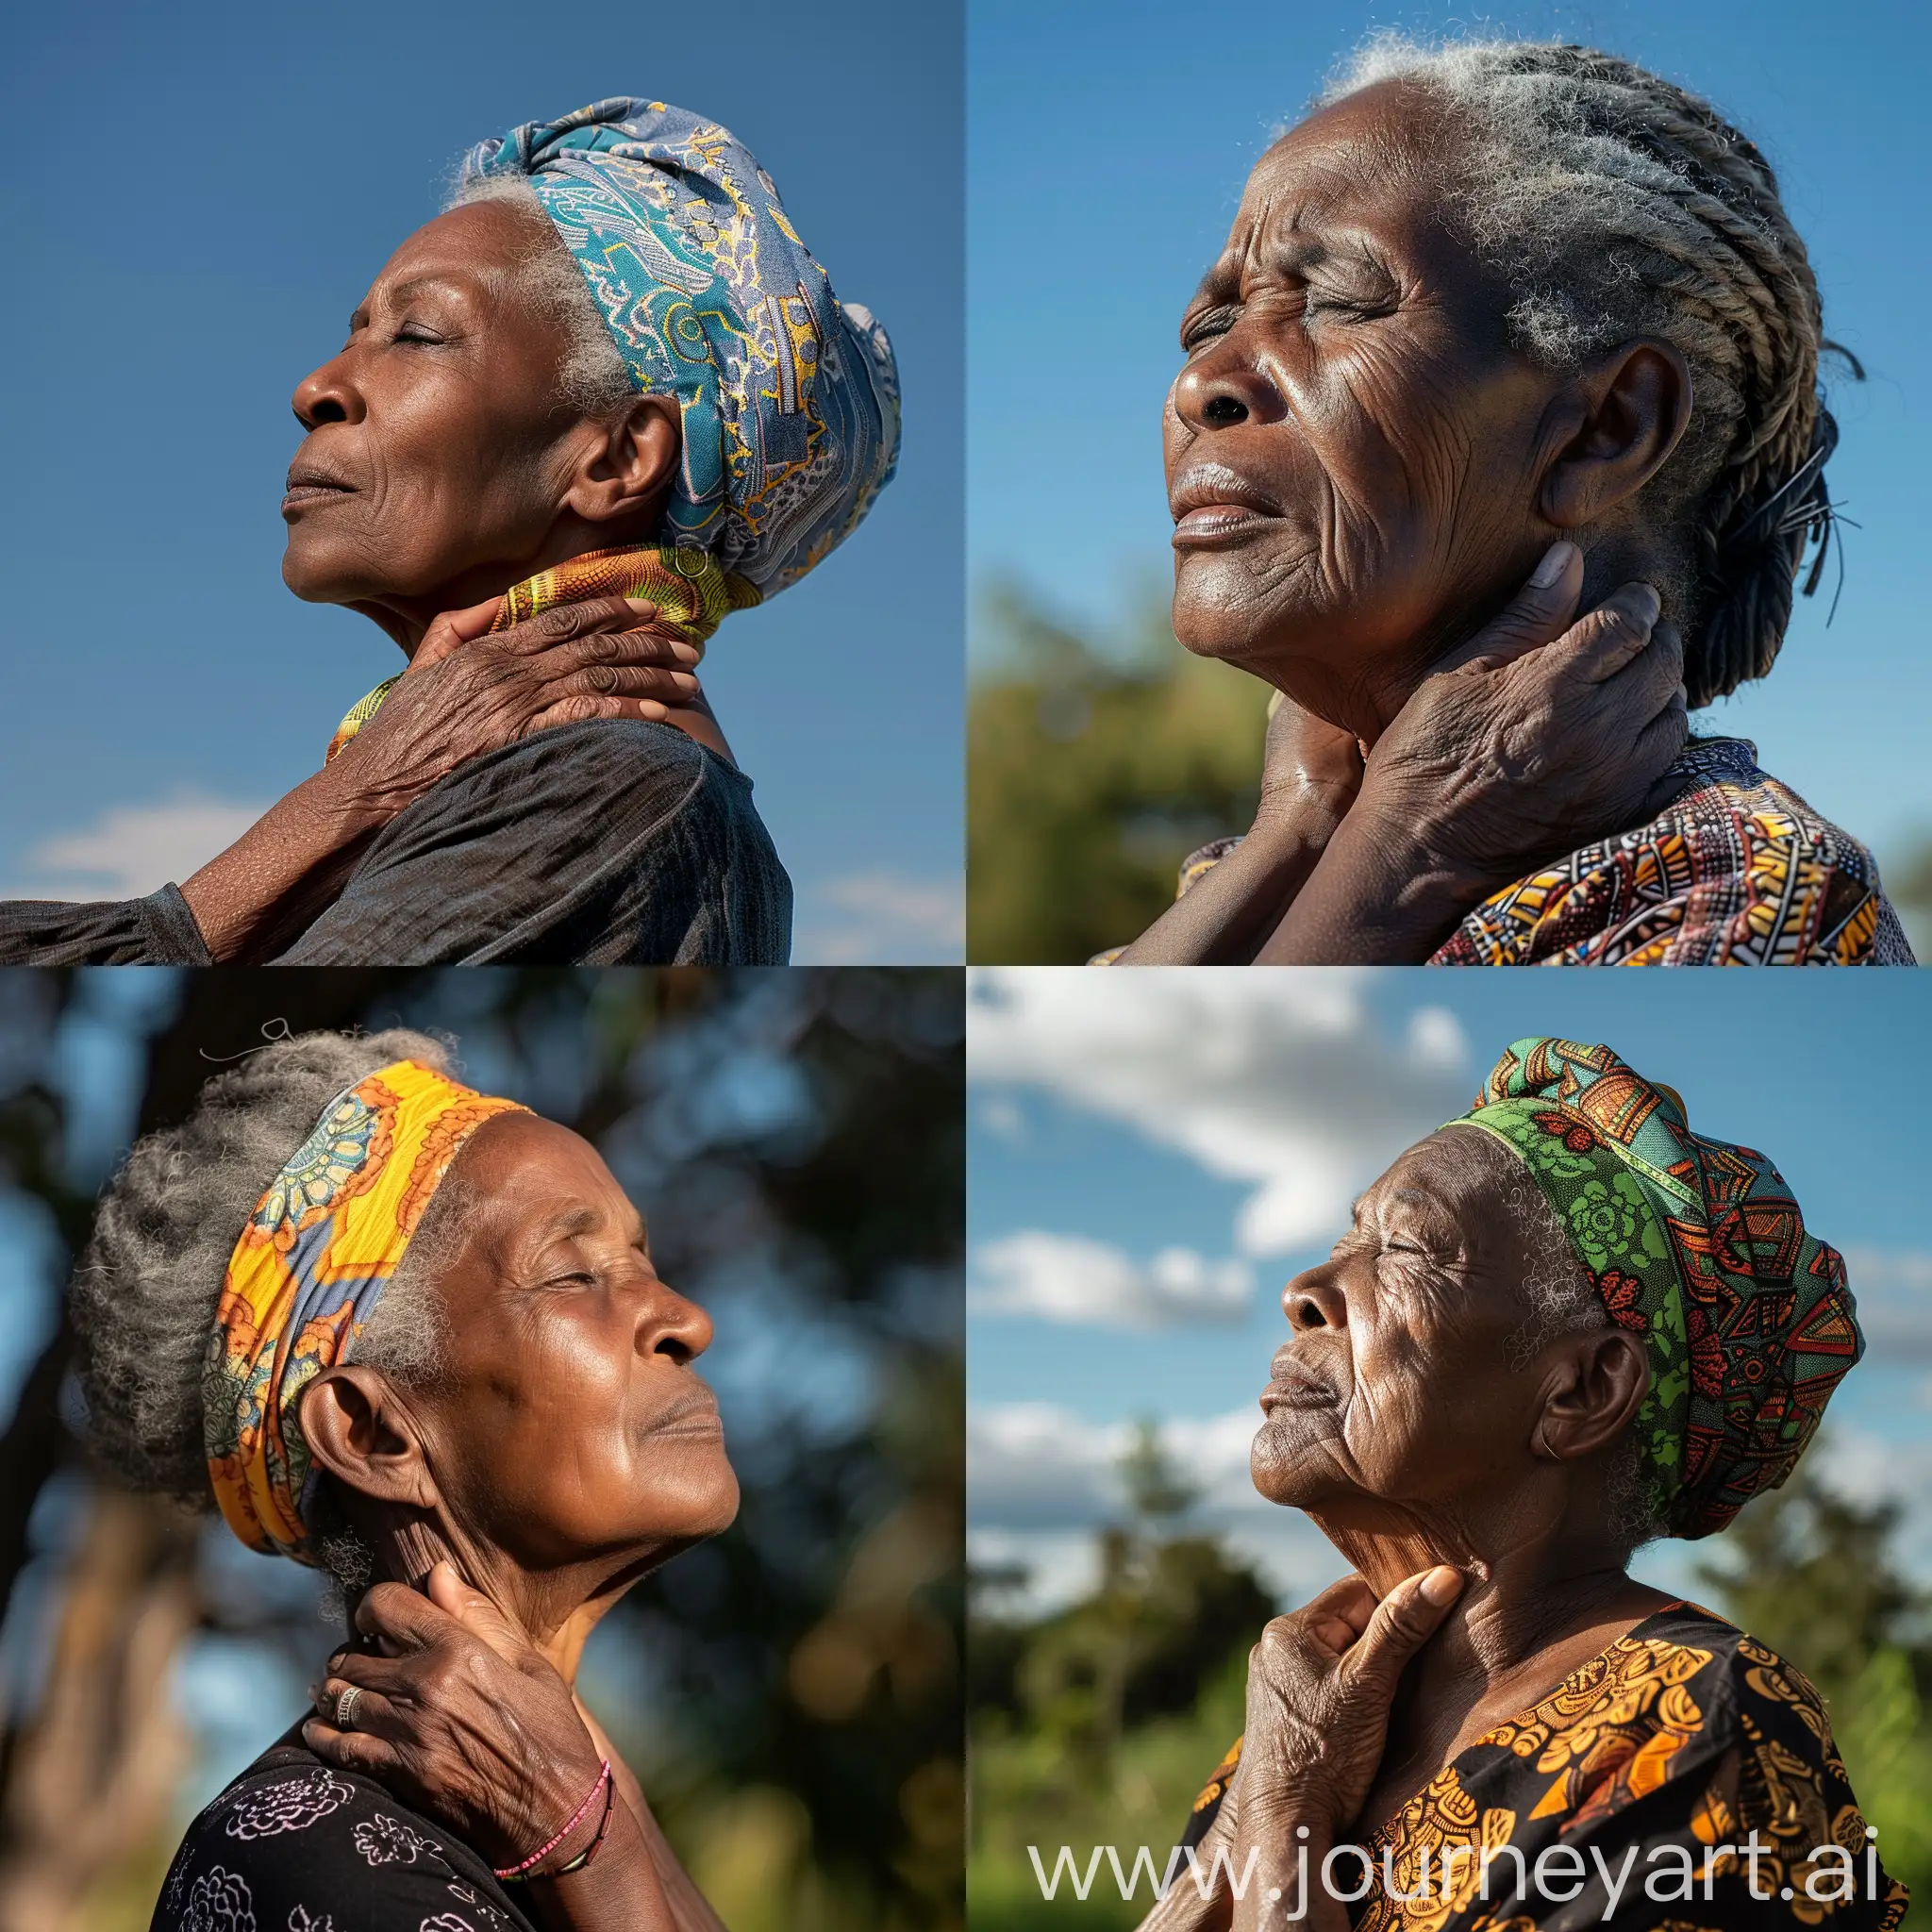 Graceful-African-Woman-Embracing-Sunlight-Captivating-60YearOld-Portrait